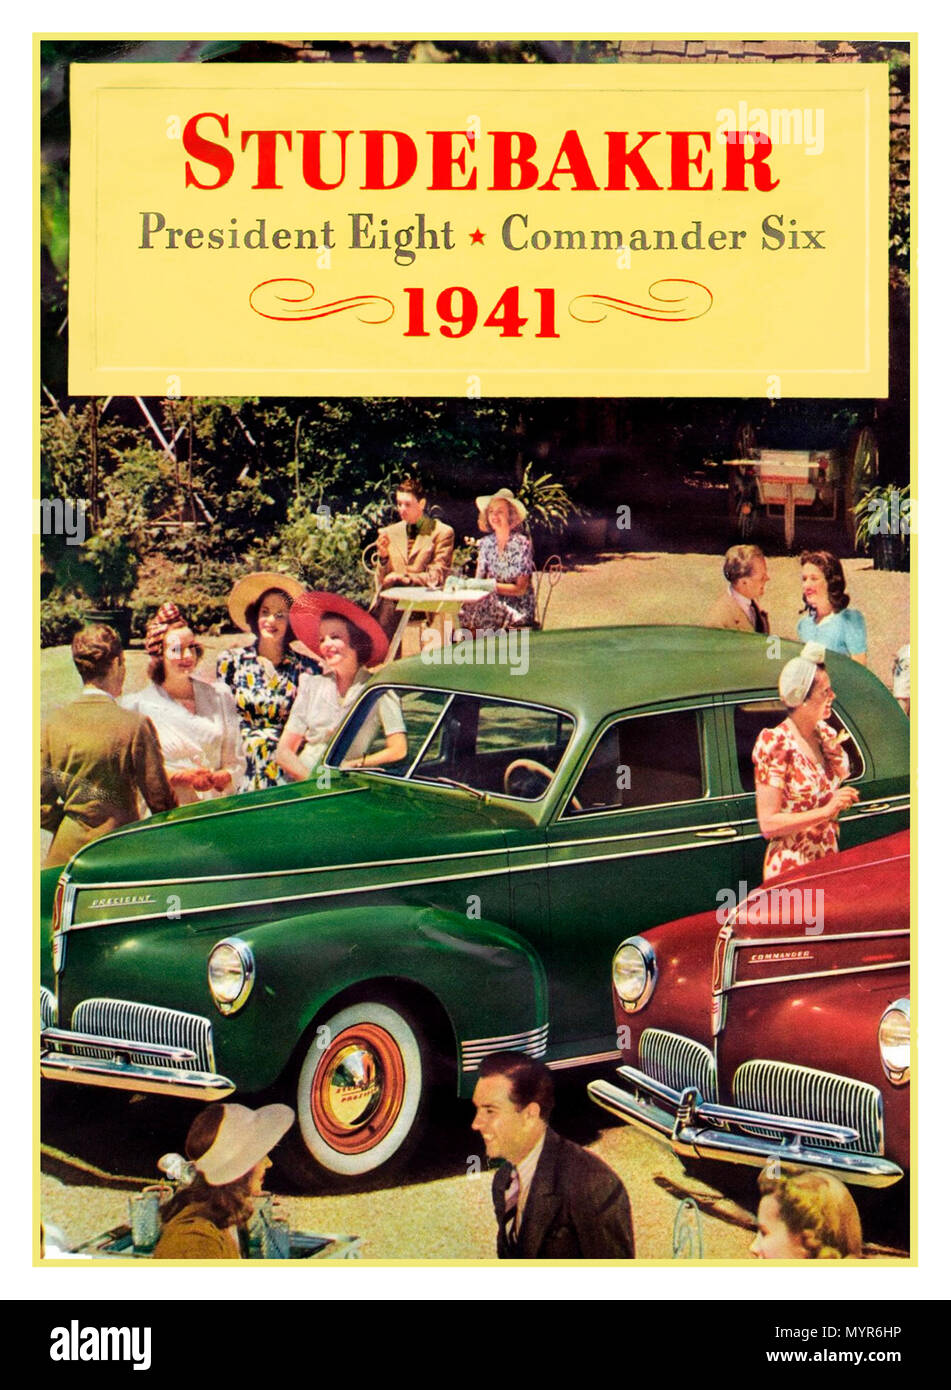 STUDEBAKER Vintage 1941 American Automobile poster press advertisement for 'The Studebaker President Eight' 'Commander Six'  the premier automobile model manufactured by the Studebaker Corporation of South Bend, Indiana (US) from 1926-1942, the President received a new body style, a four-door sedan with rear-opening rear doors Stock Photo